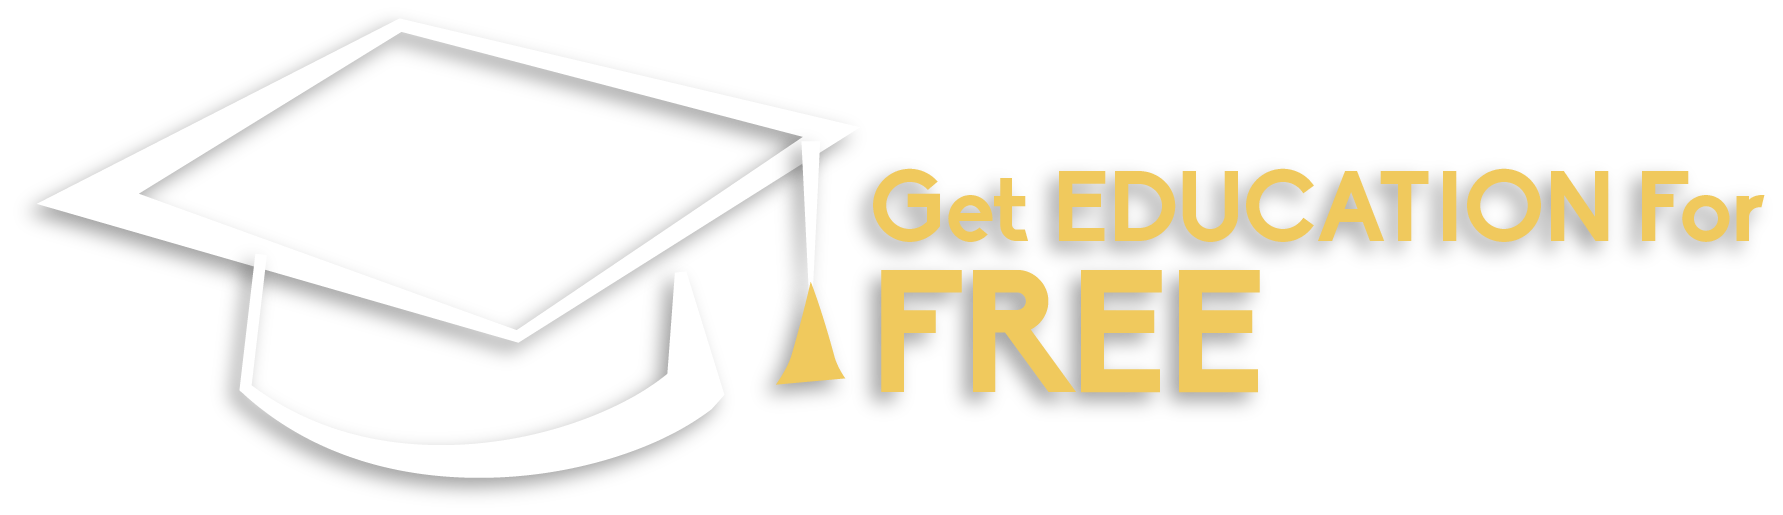 Get your Education for FREE